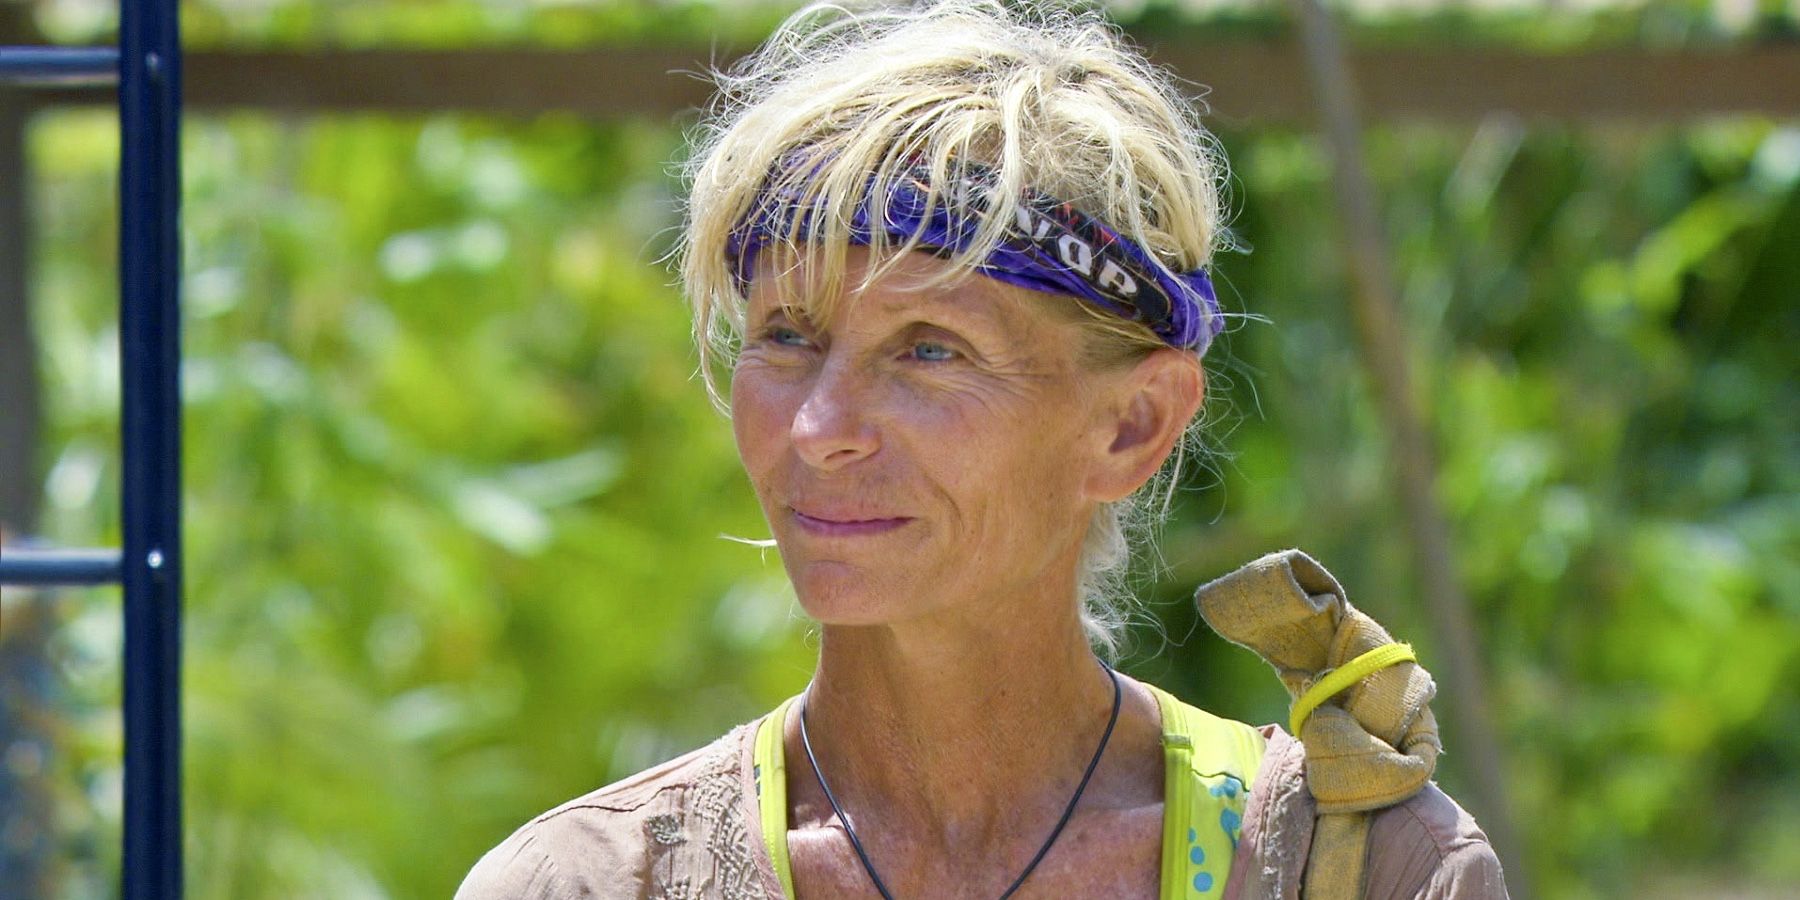 Tina Wesson wears her game face at a challenge for Survivor: Blood vs. Water